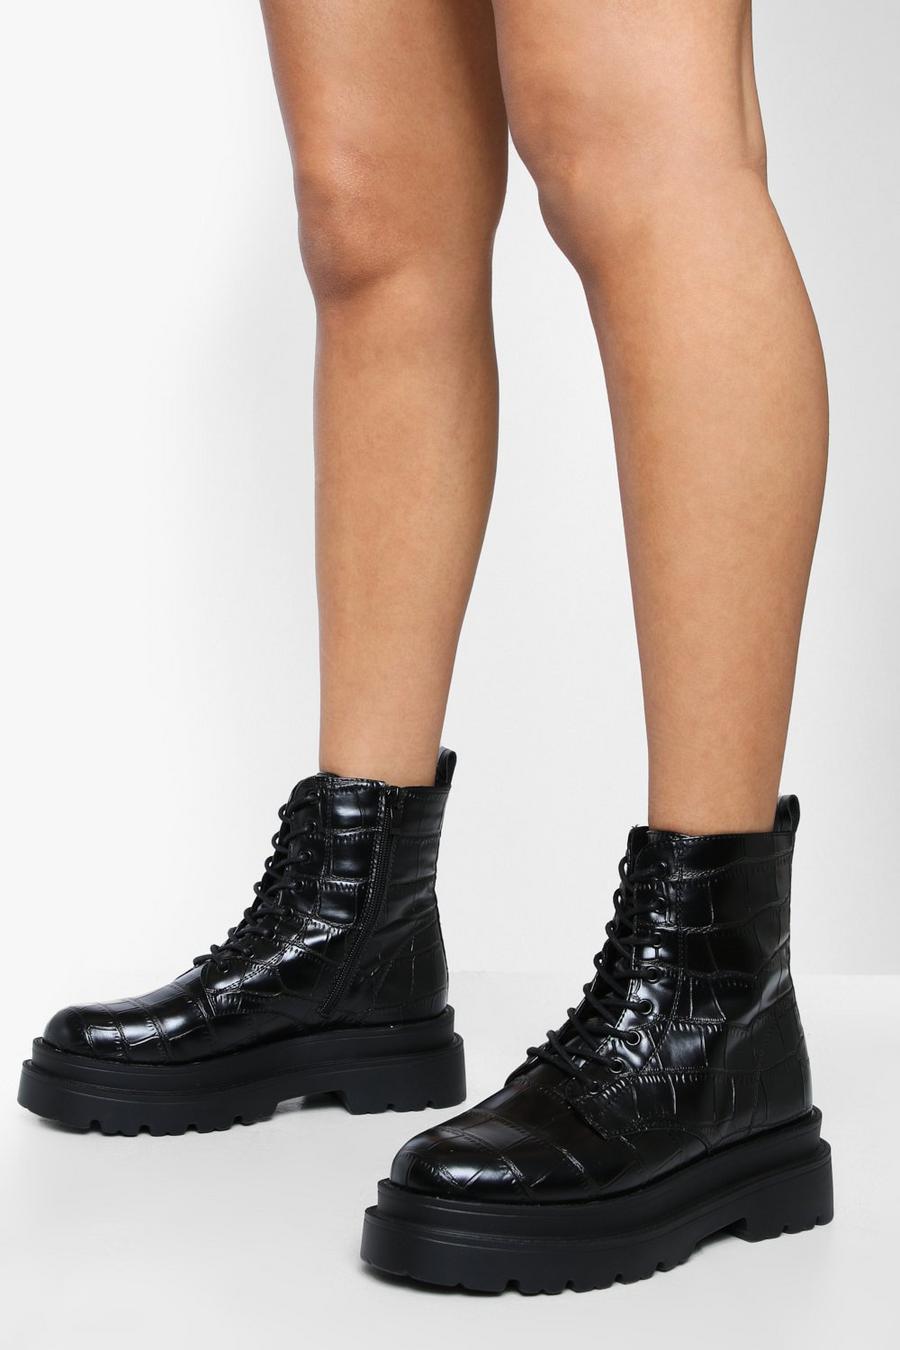 Black Croc Chunky Hiker Boots image number 1